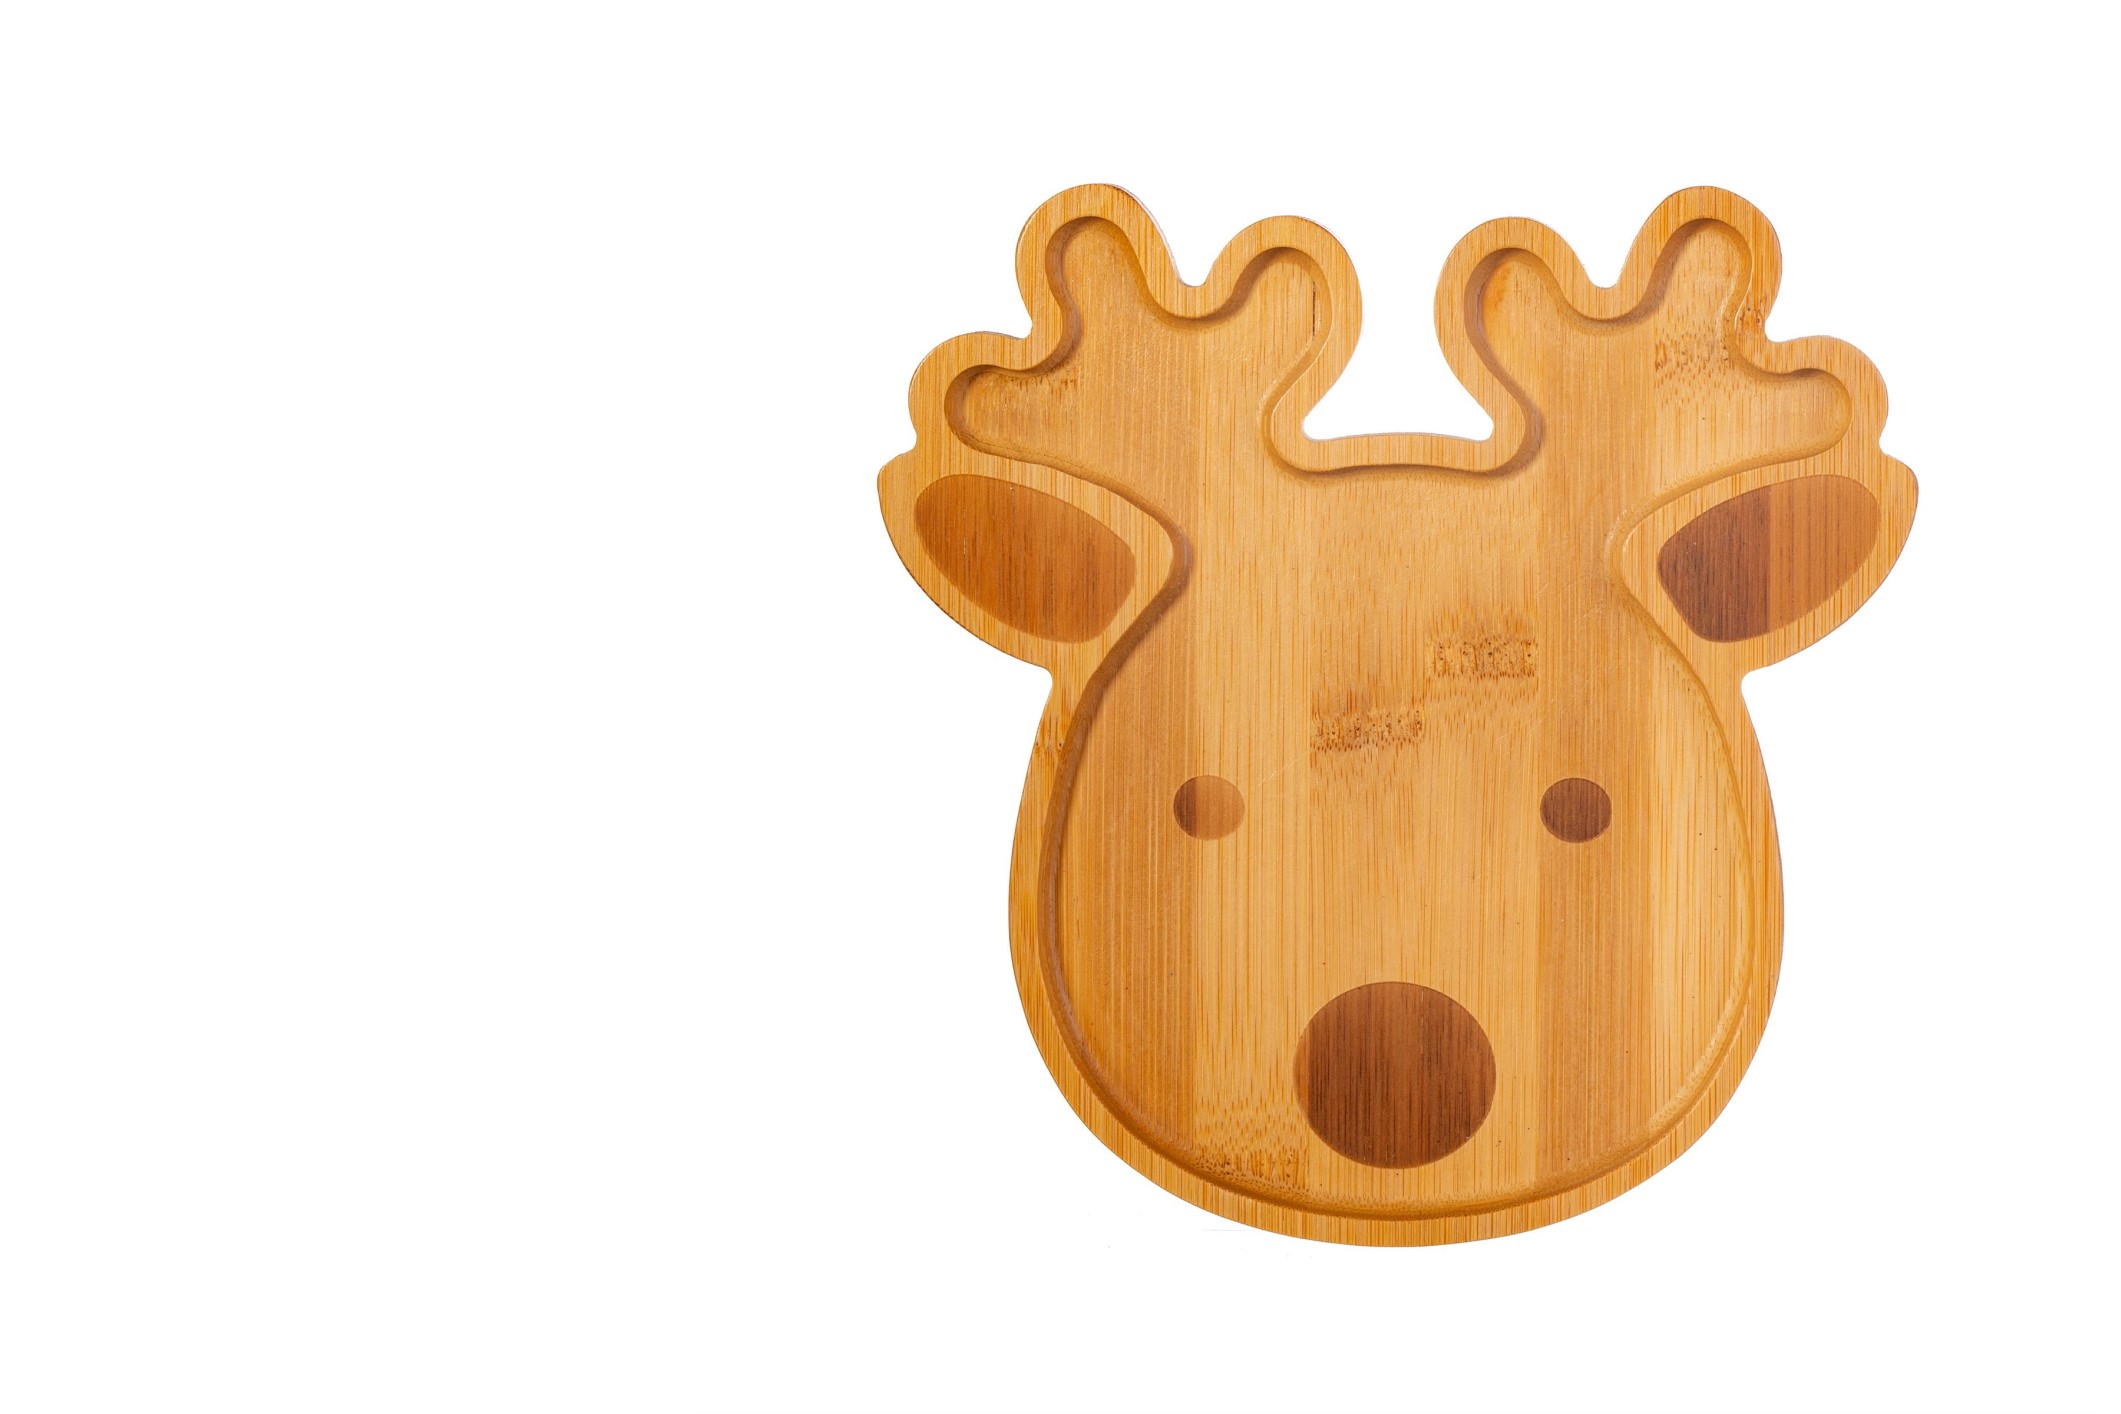 Bamboo plate in the shape of a reindeer head